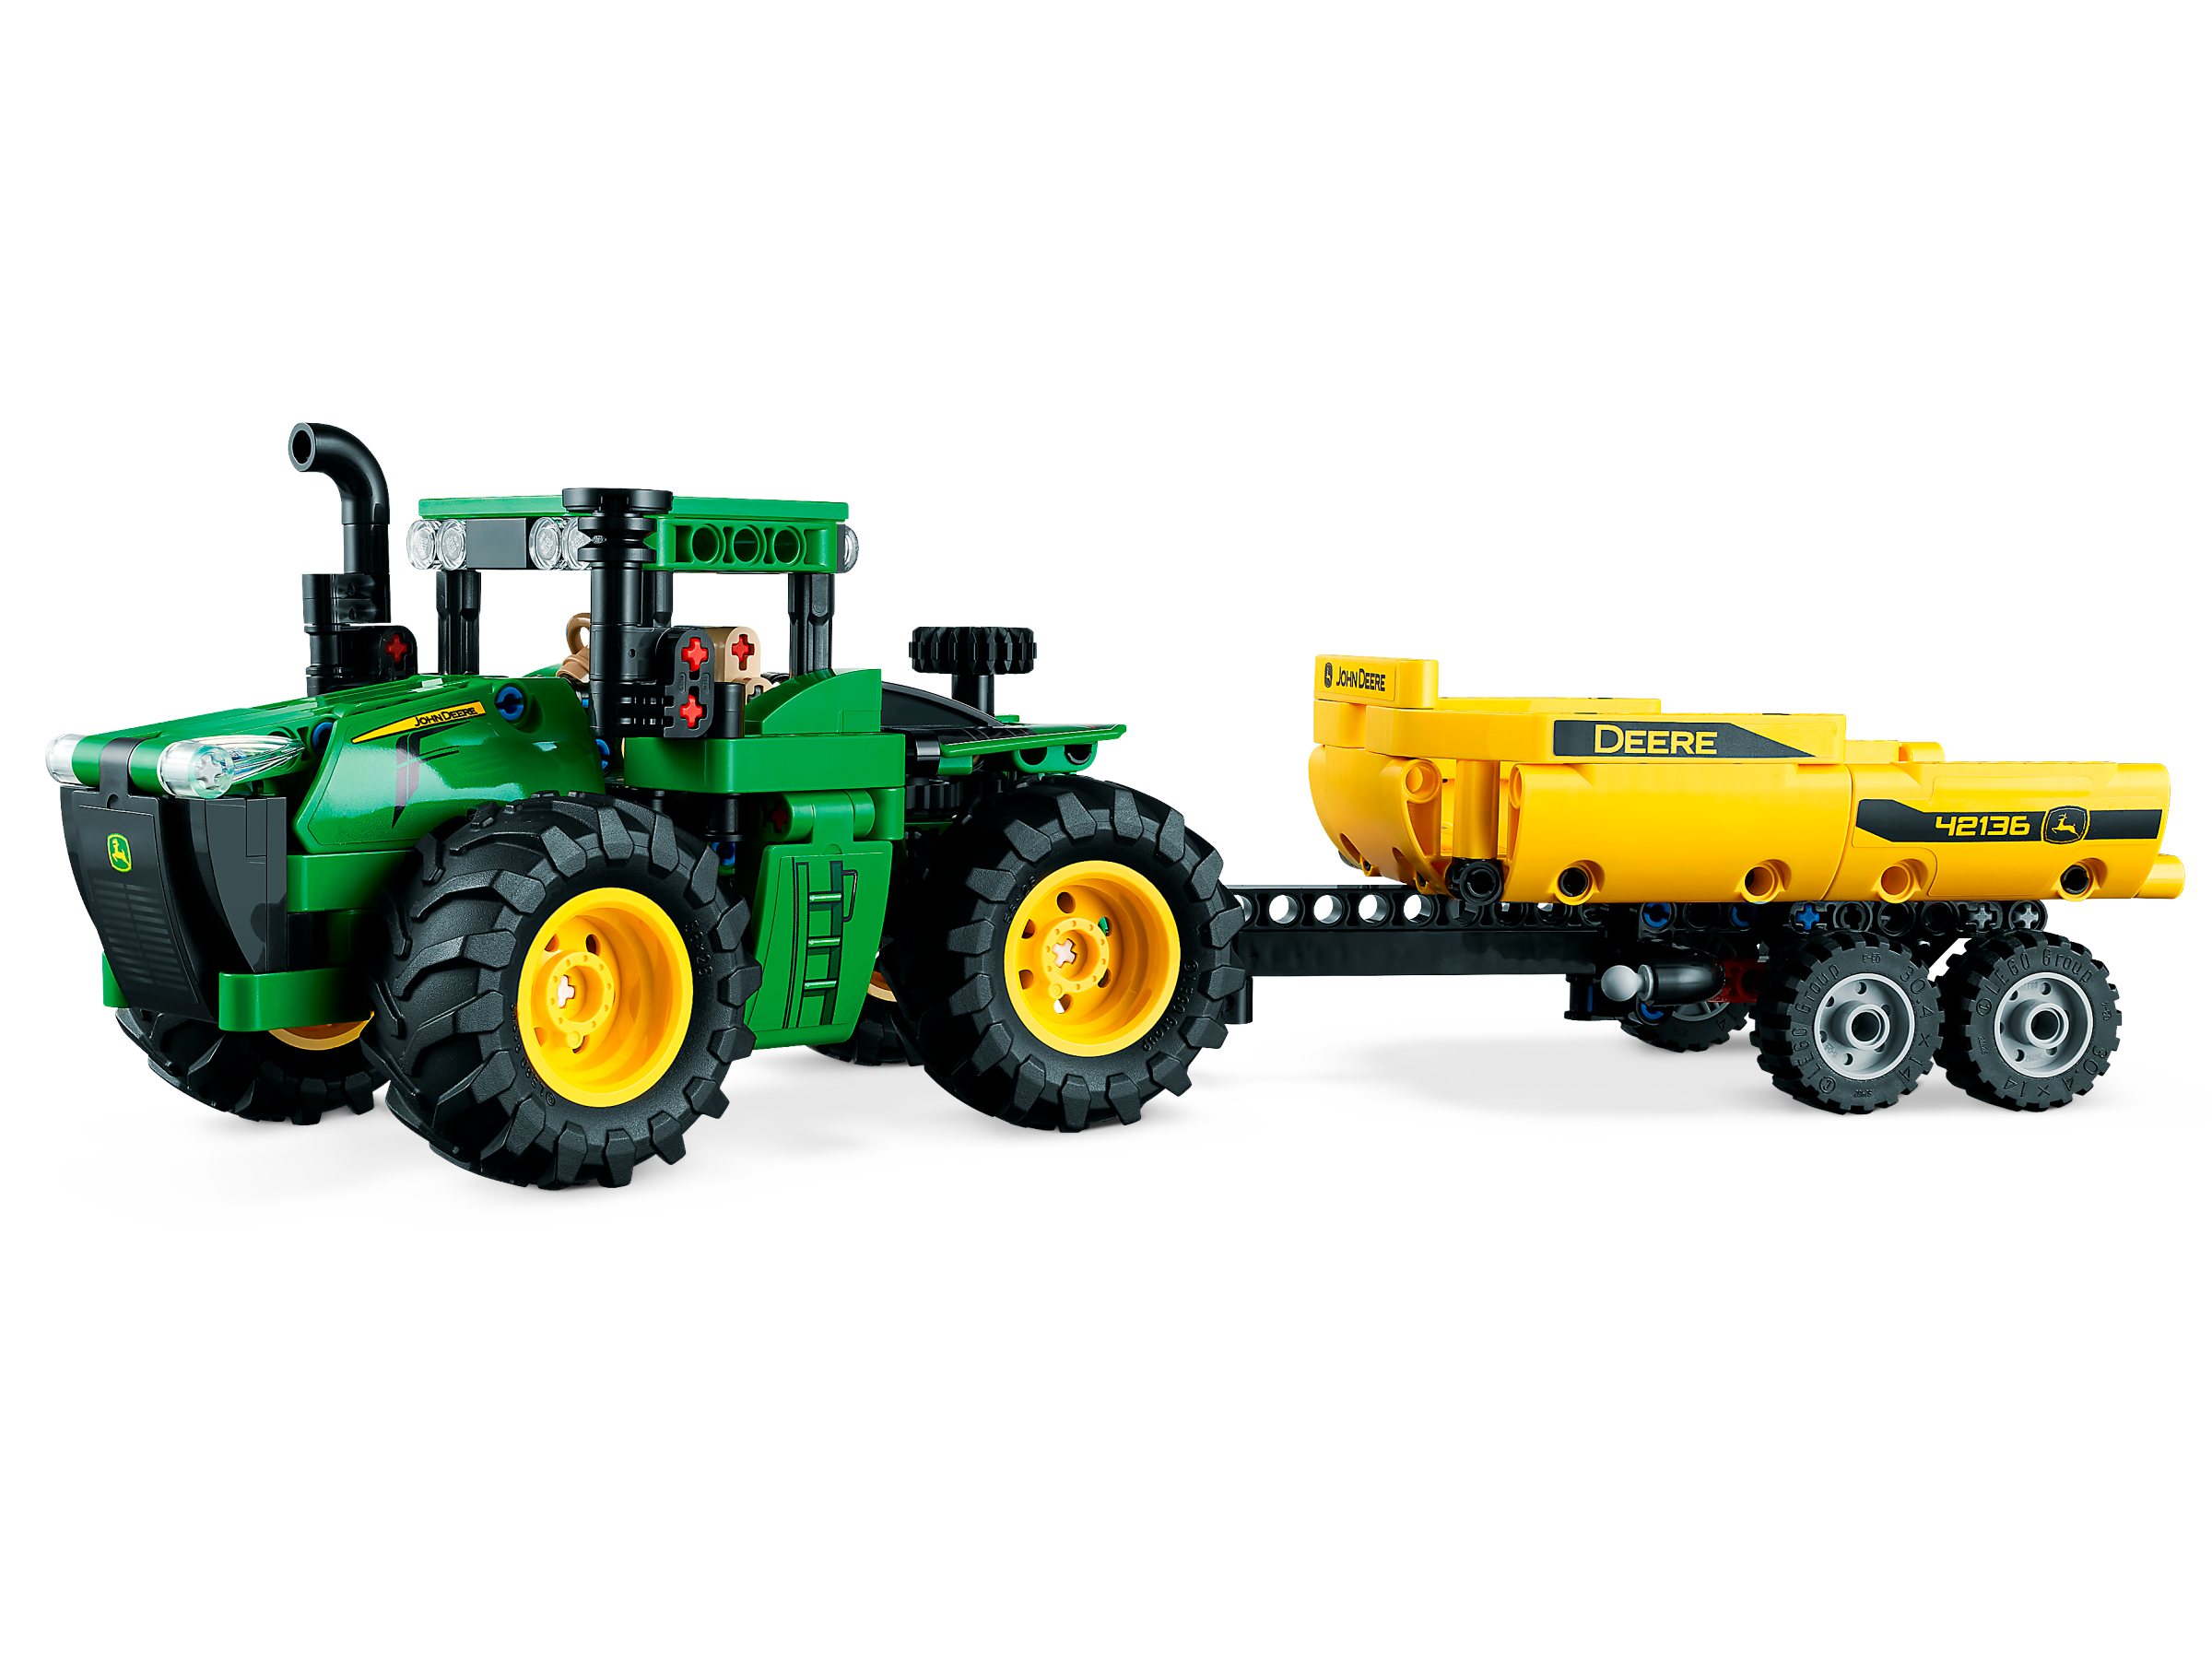 John Deere 9620R 4WD Tractor 42136 | Technic™ | Buy online at Official LEGO® Shop US